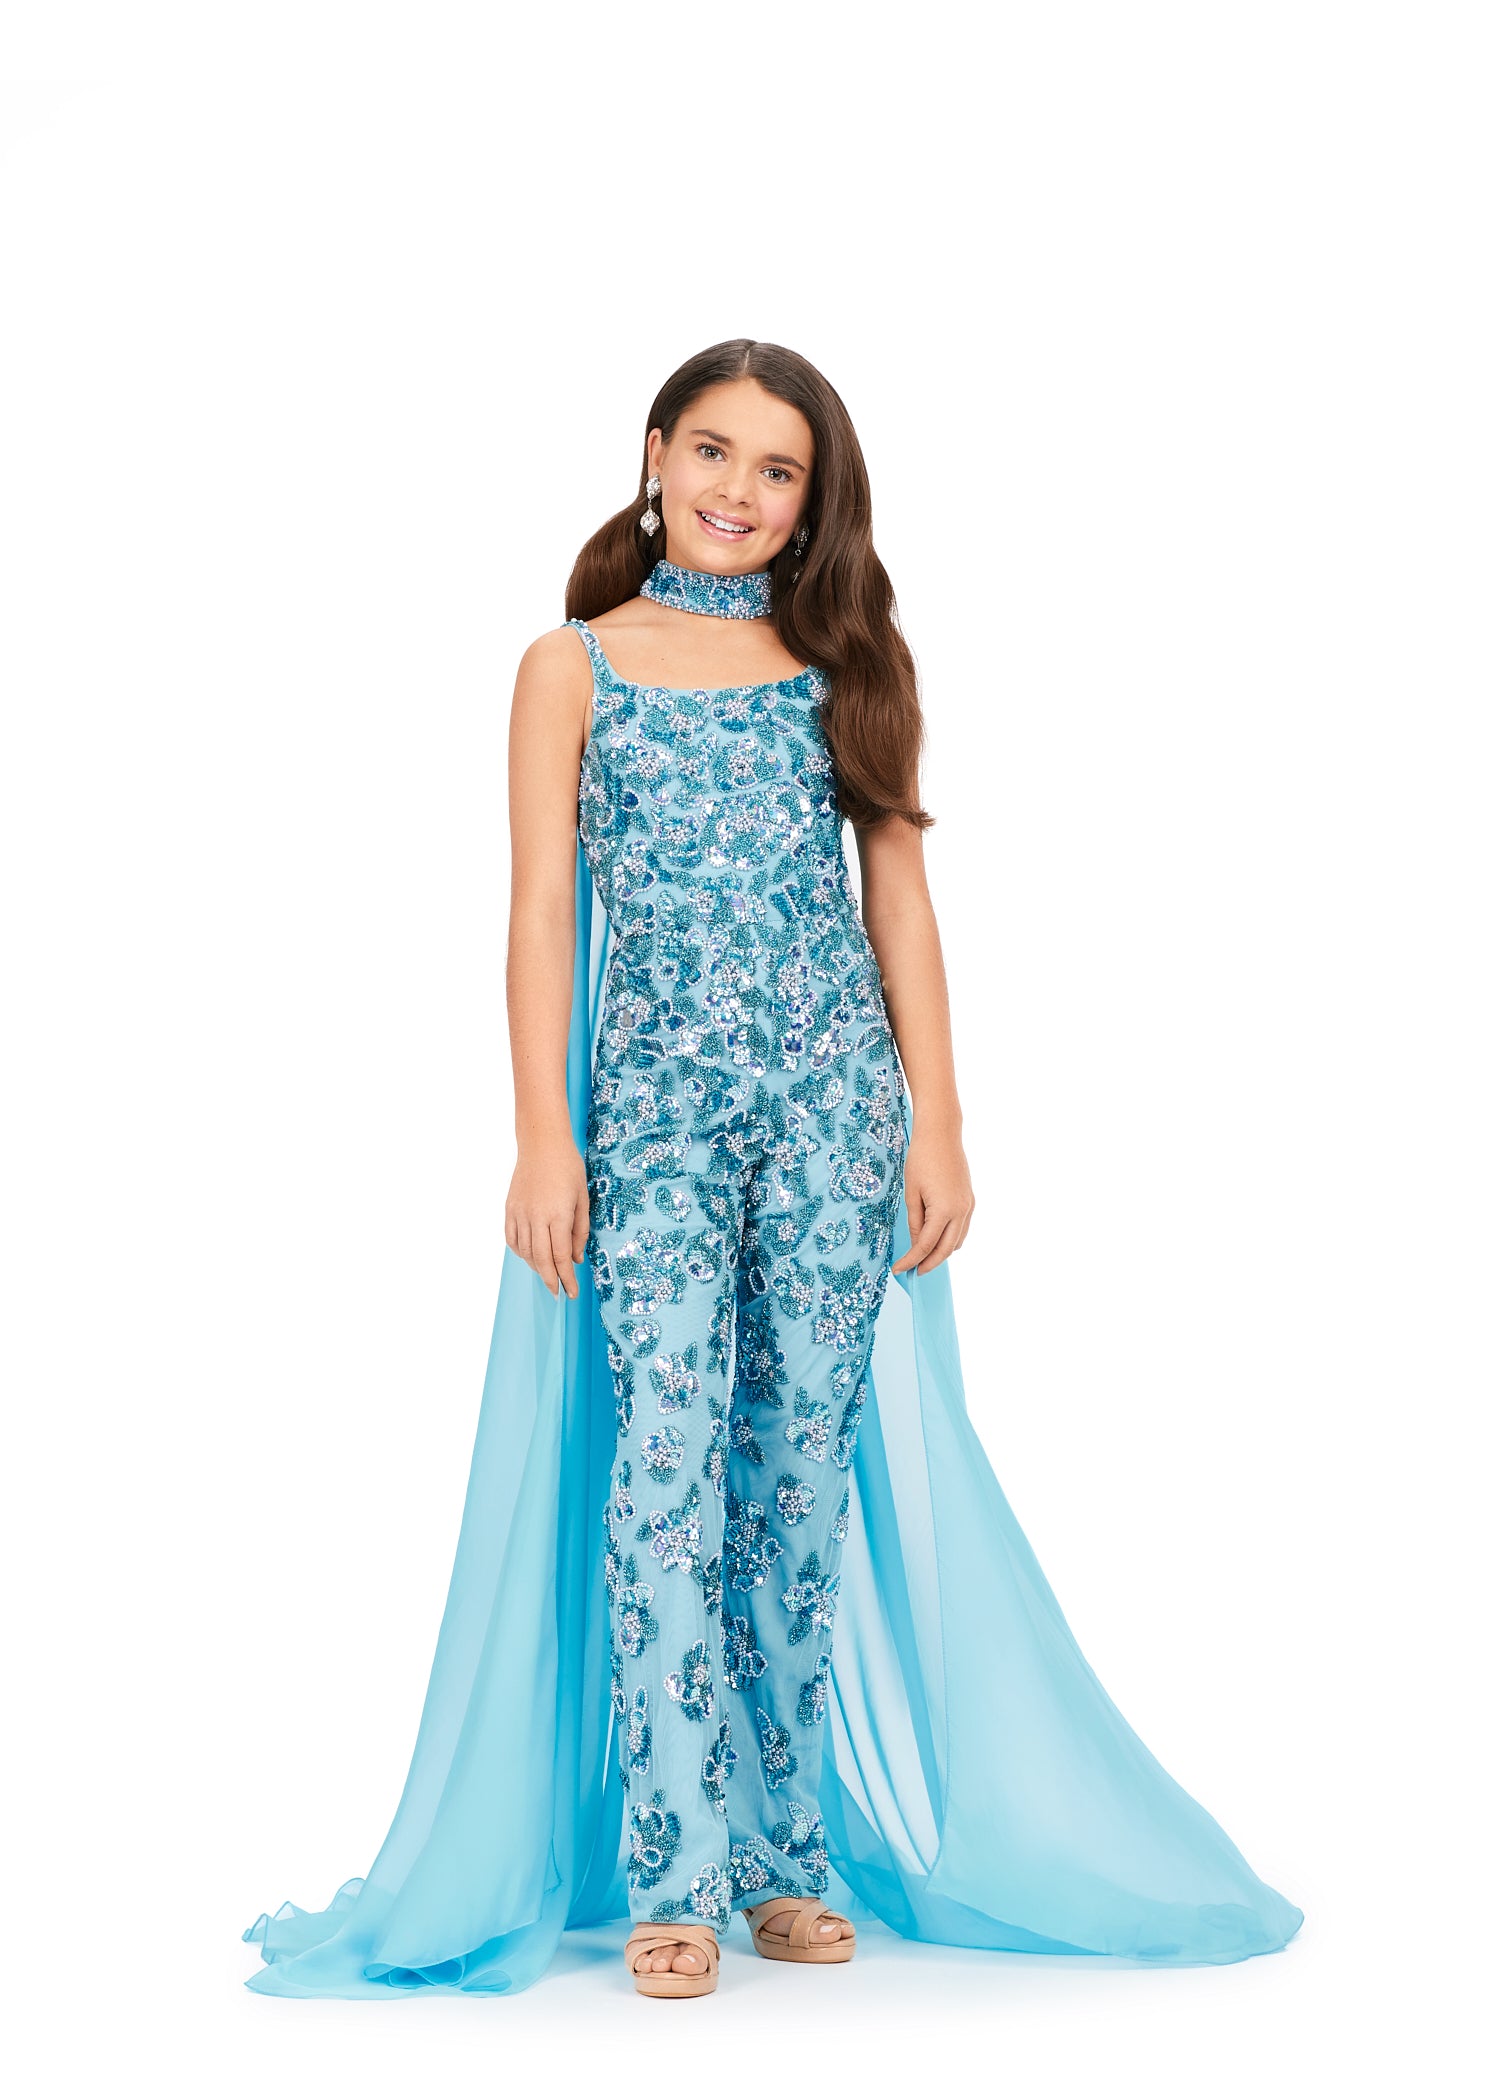 Ashley Lauren Kids 8190 Fully Beaded With Beaded Choker And Chiffon Cape Jumpsuit. A jumpsuit for a queen! This fully beaded number features a matching choker with an attached cape. This screams fabulous!